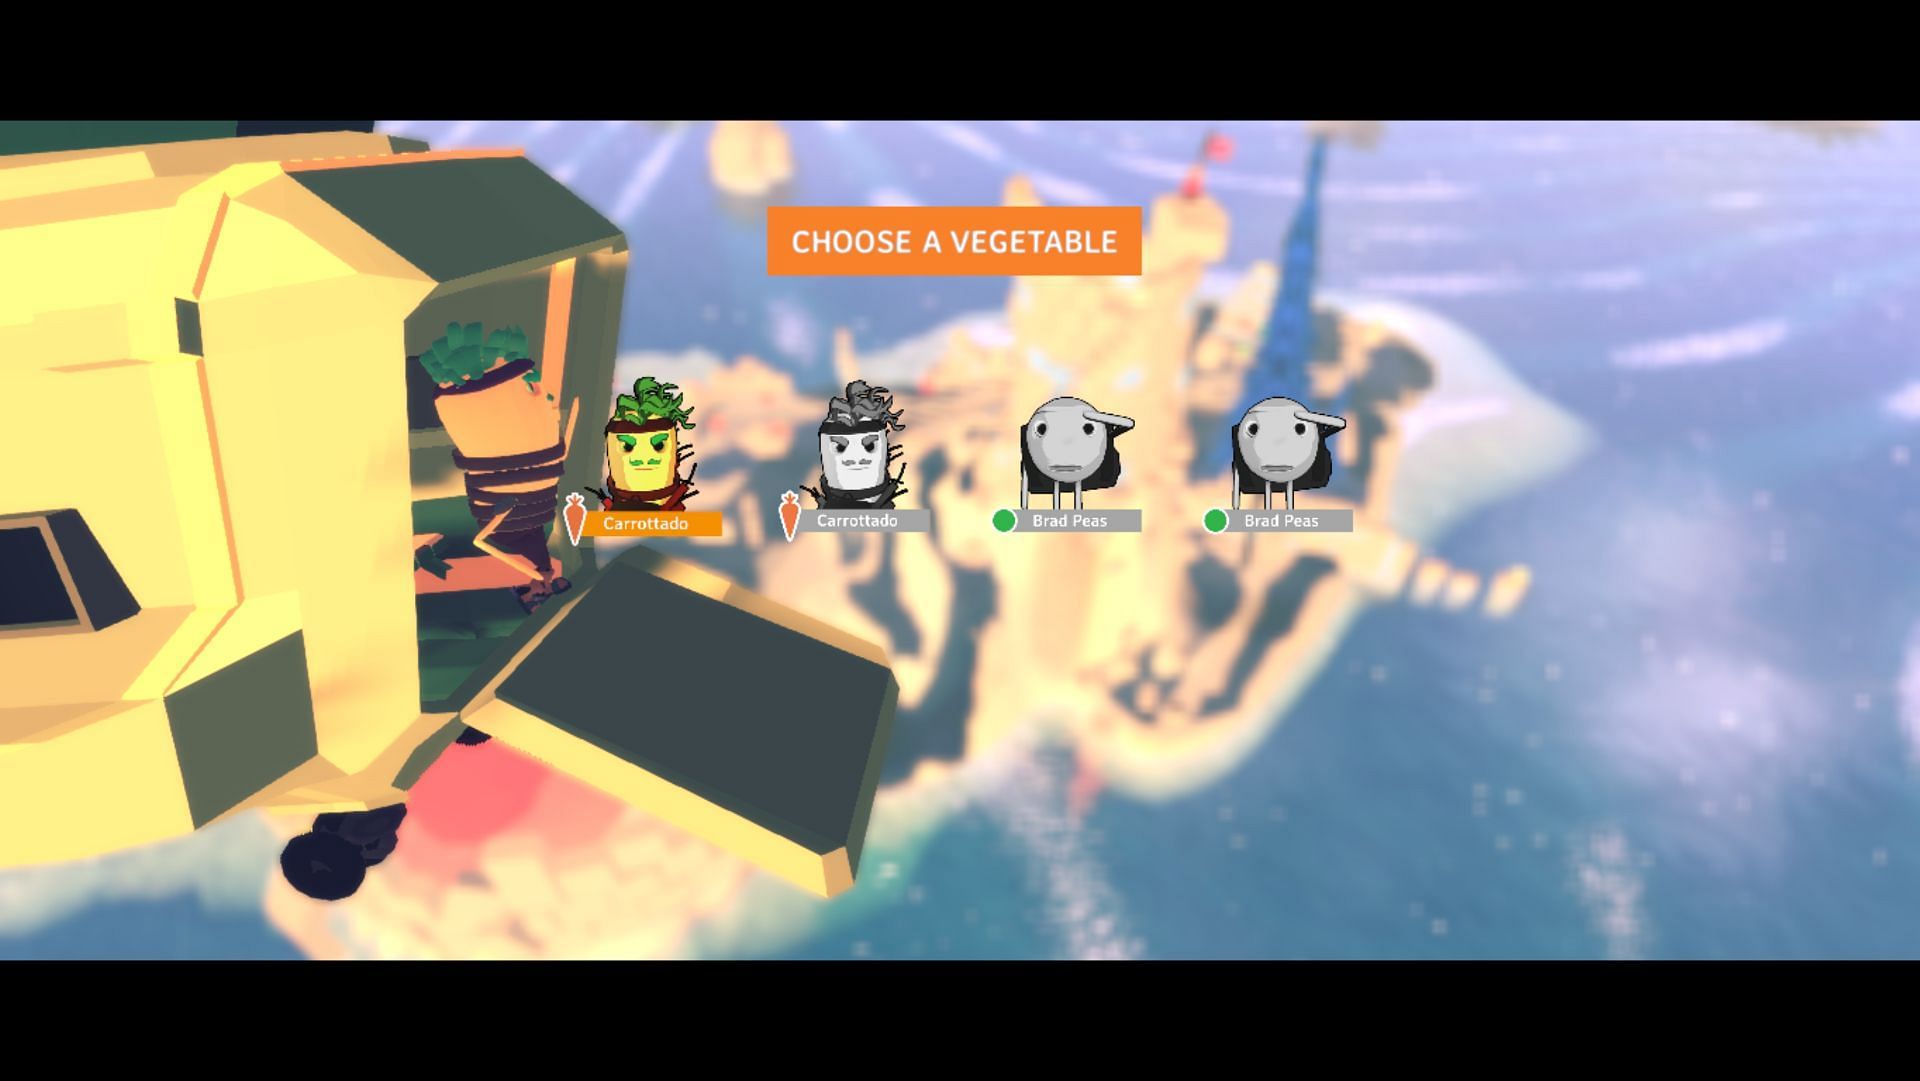 Players can choose from a wide range of vegetable warriors (Image via Red Limb Studio)